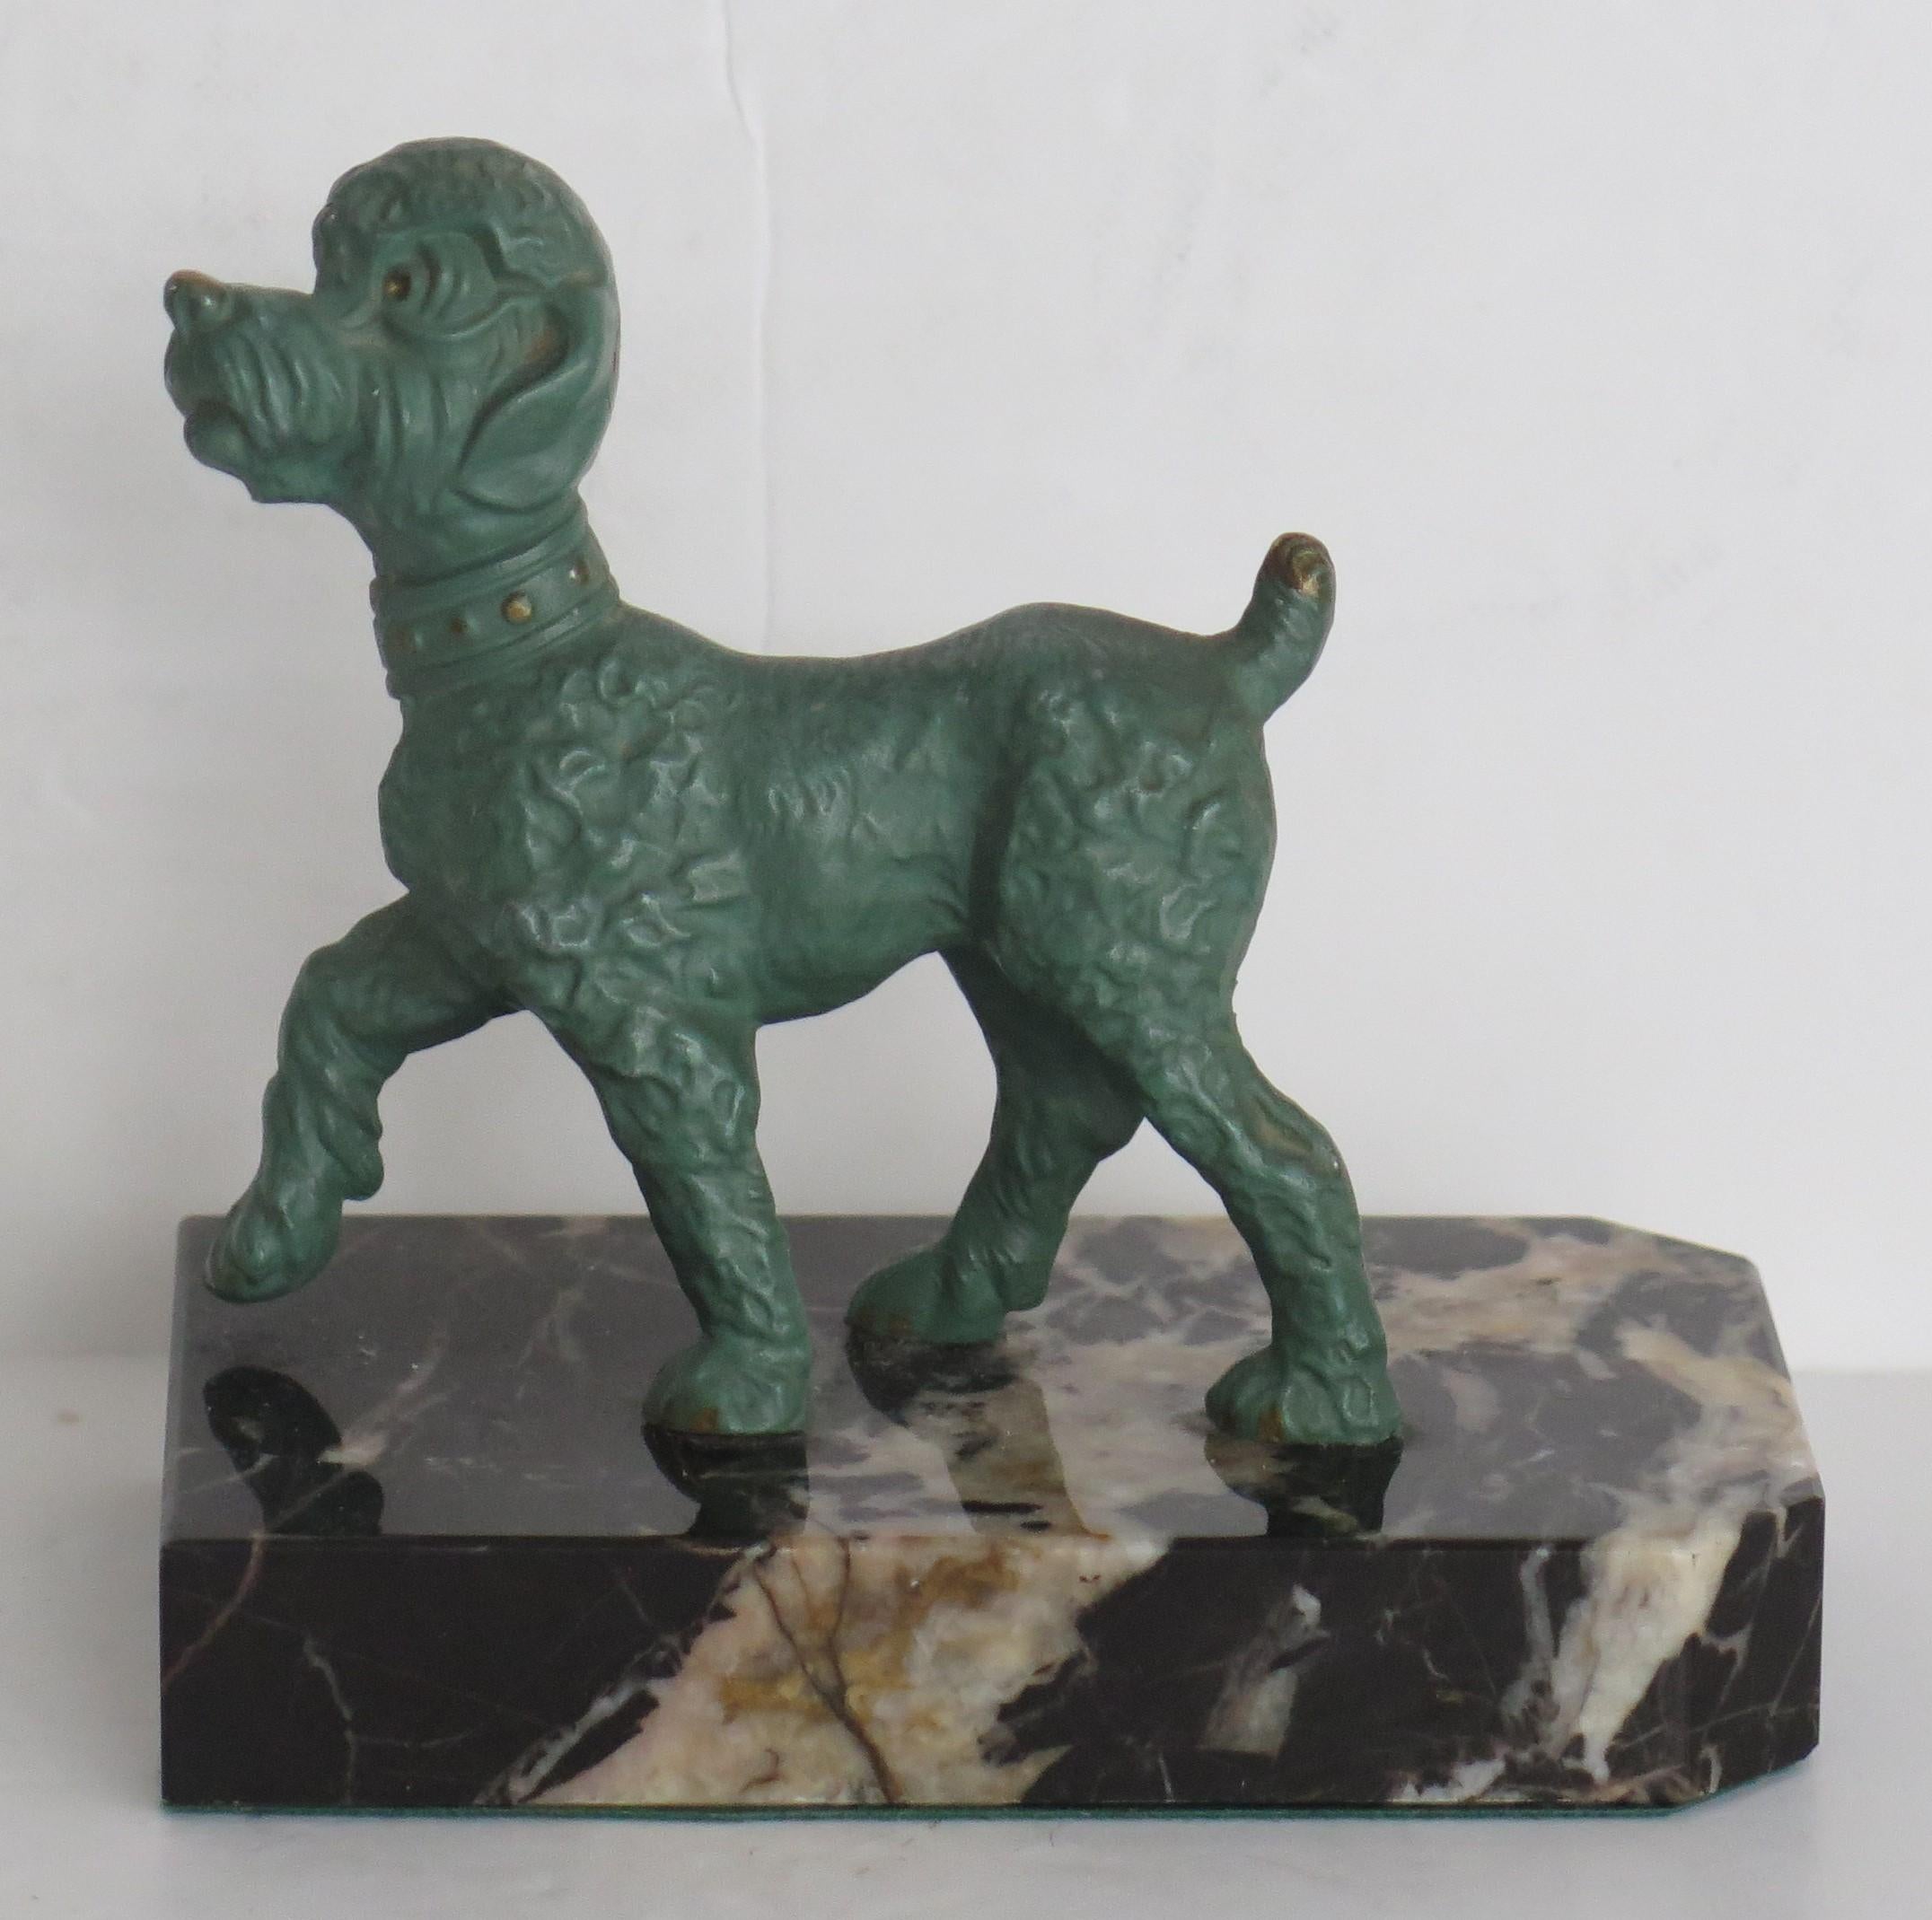 20th Century Art Deco Bookends of Poodle Dogs Spelter on Portoro Marble Bases, circa 1930